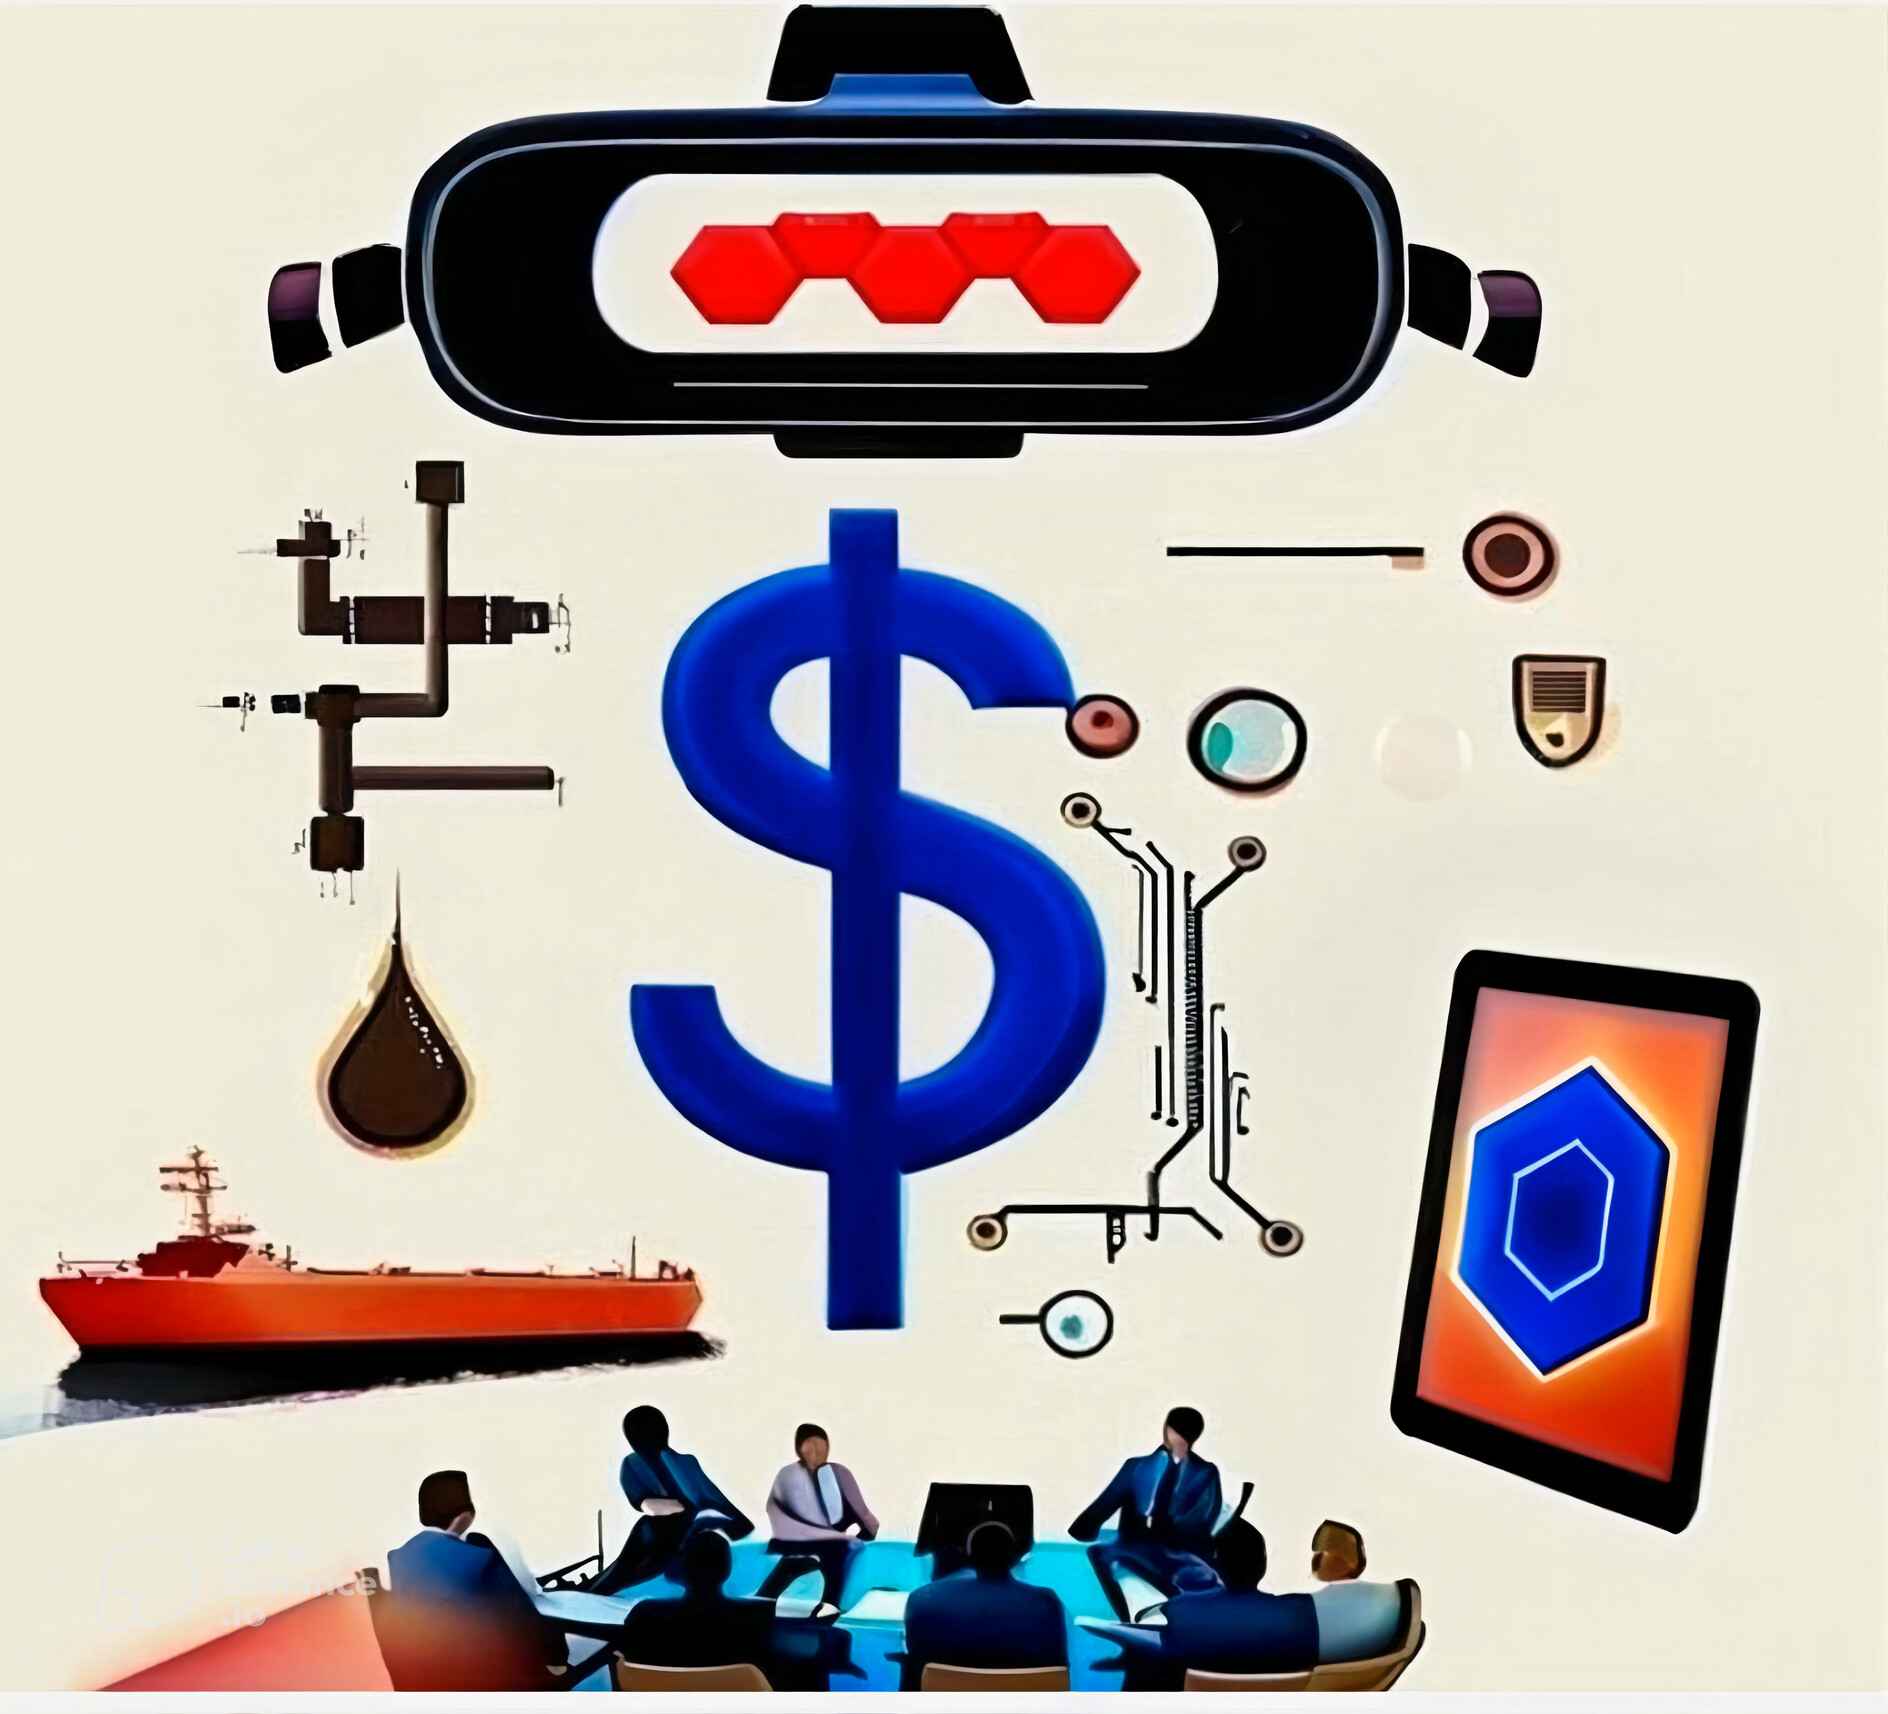 The Digital Dollar is the New Petrodollar, Because Data is The New Oil